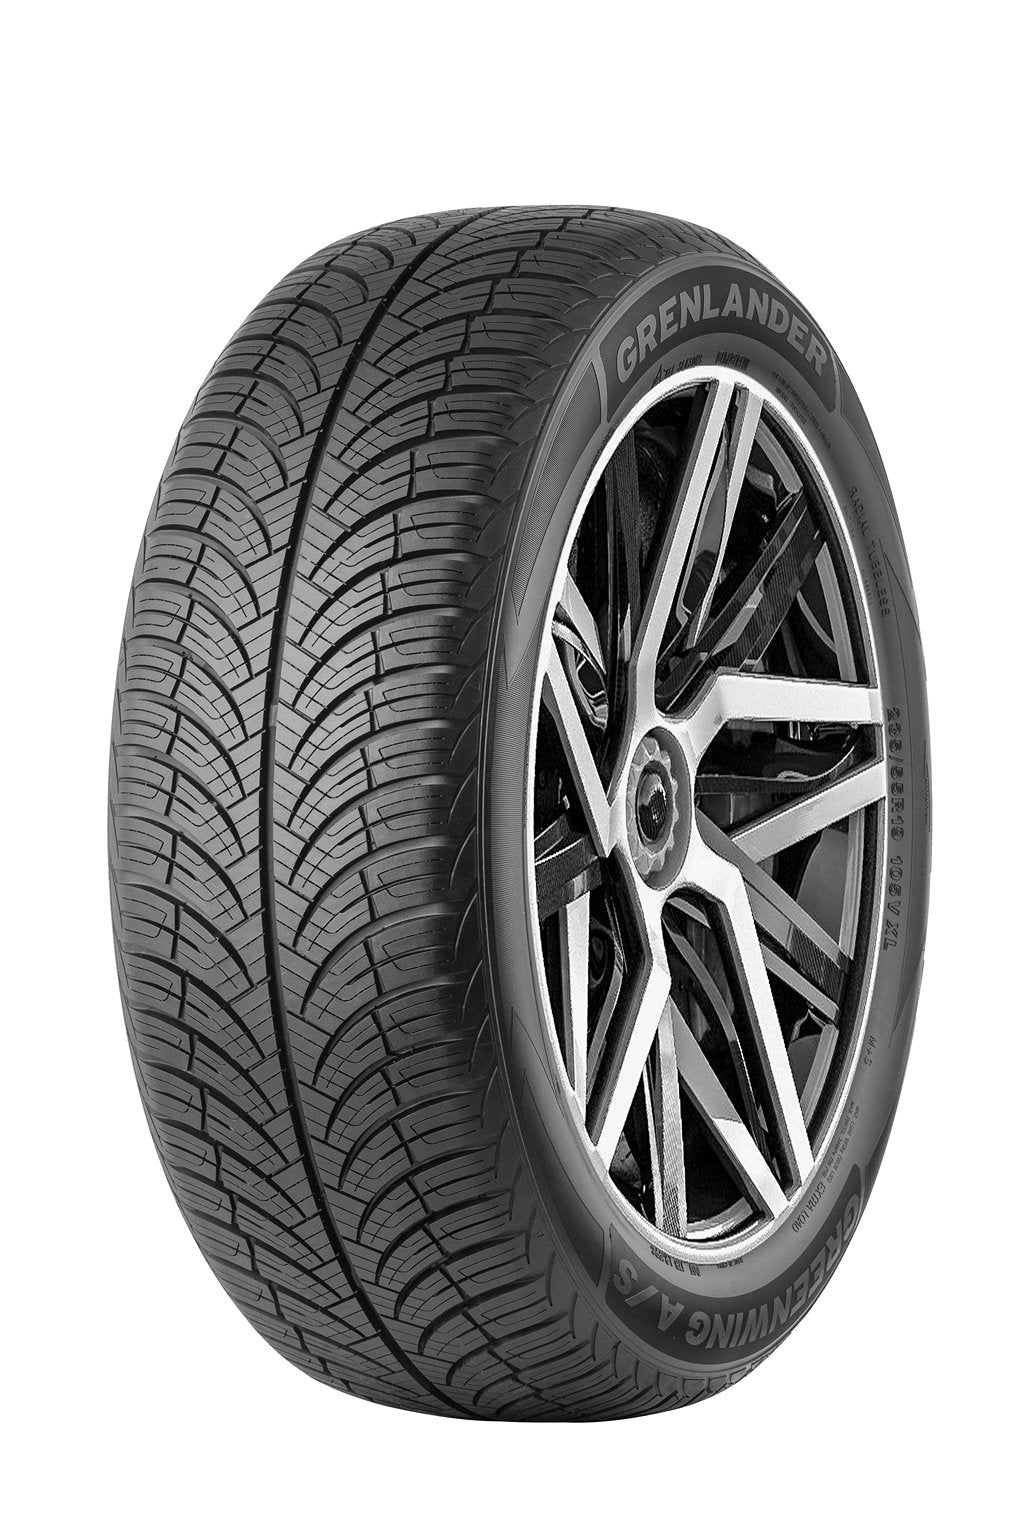 215/45R17 GRENLANDER GREENWING A/S ALL WEATHER - Toee Tire